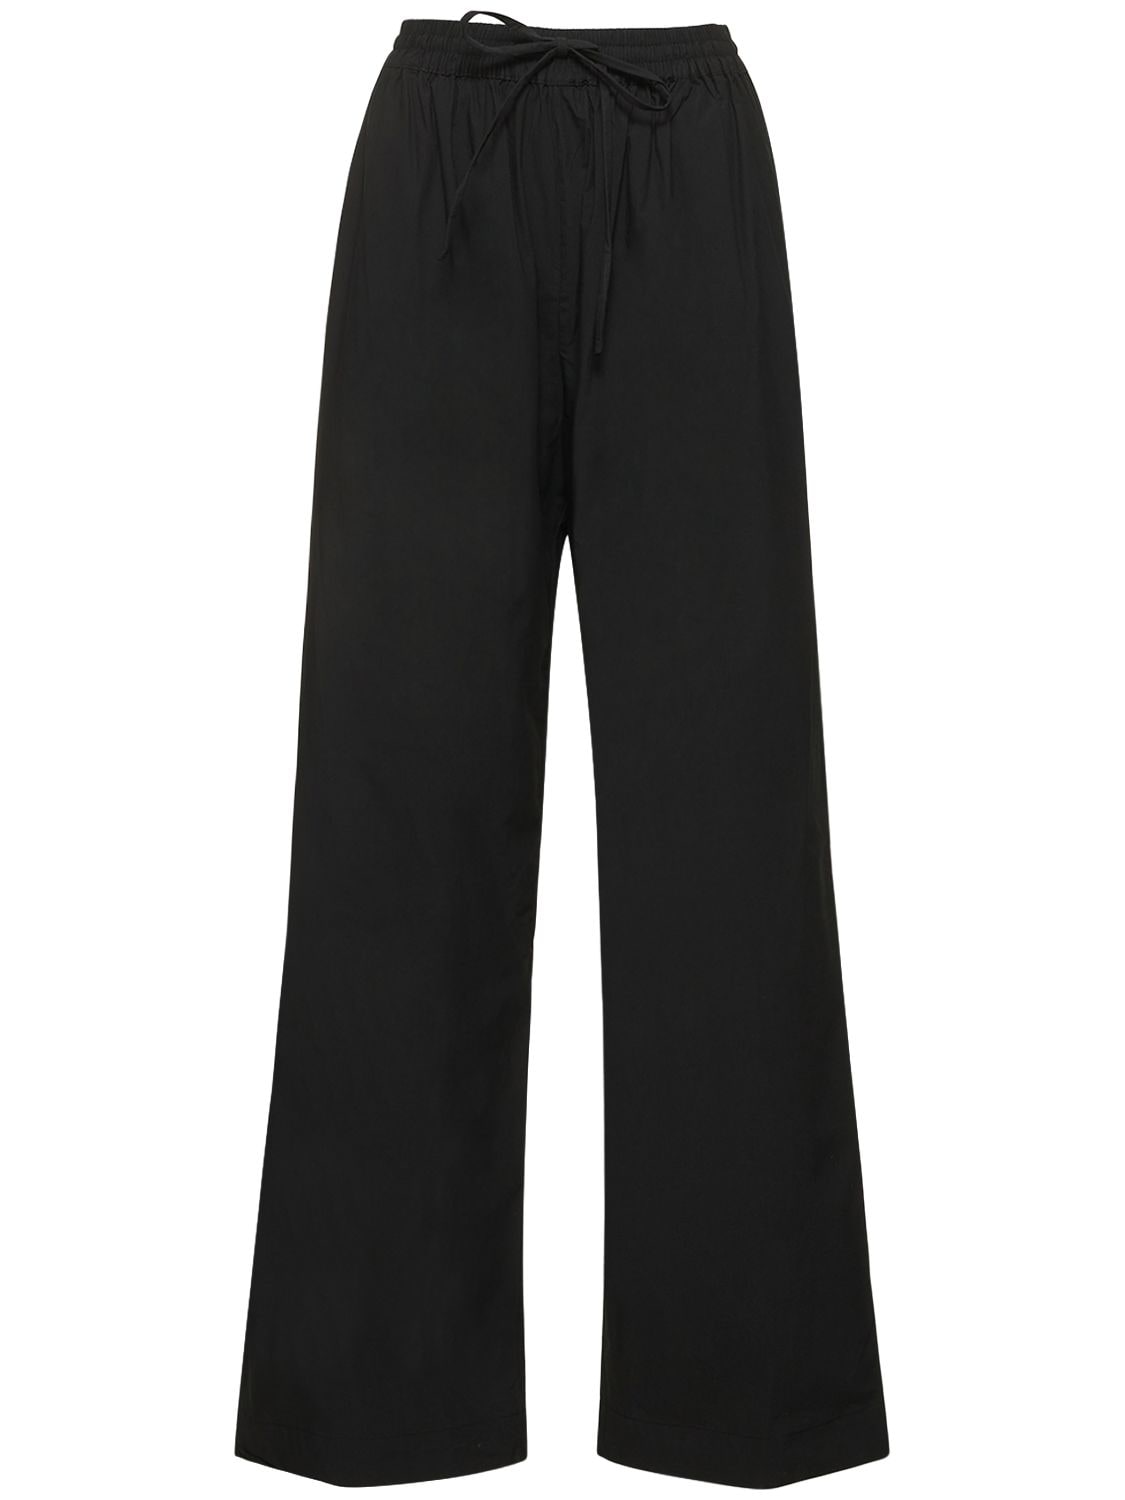 Image of Relaxed Organic Cotton Pants